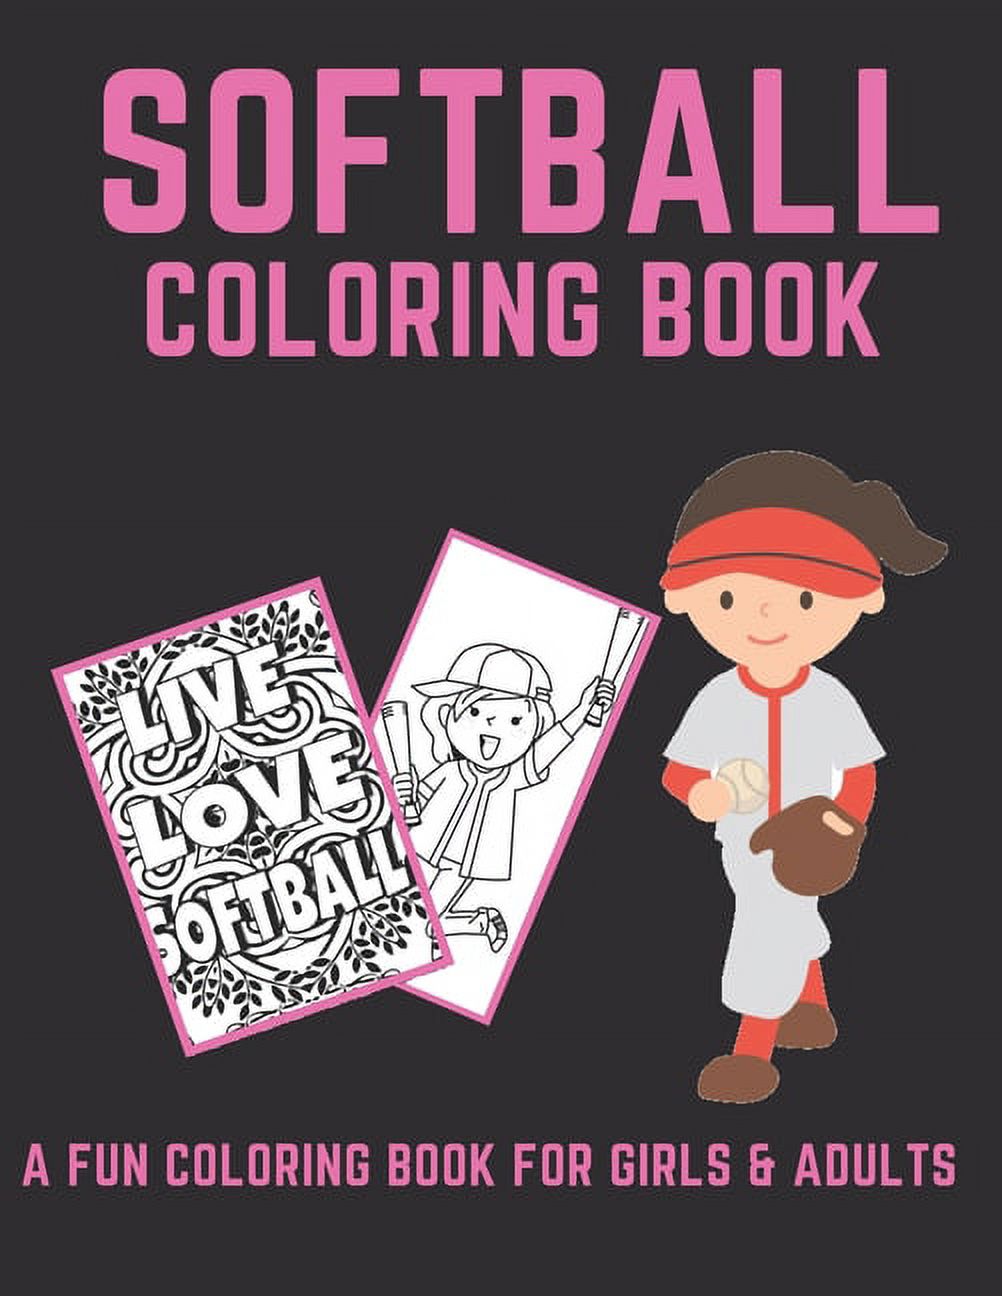 Softball Activity Books: Softball Coloring Book : A Fun Coloring Book For Girls & Adult Softball Players And Fans (Series #1) (Paperback) - image 1 of 1